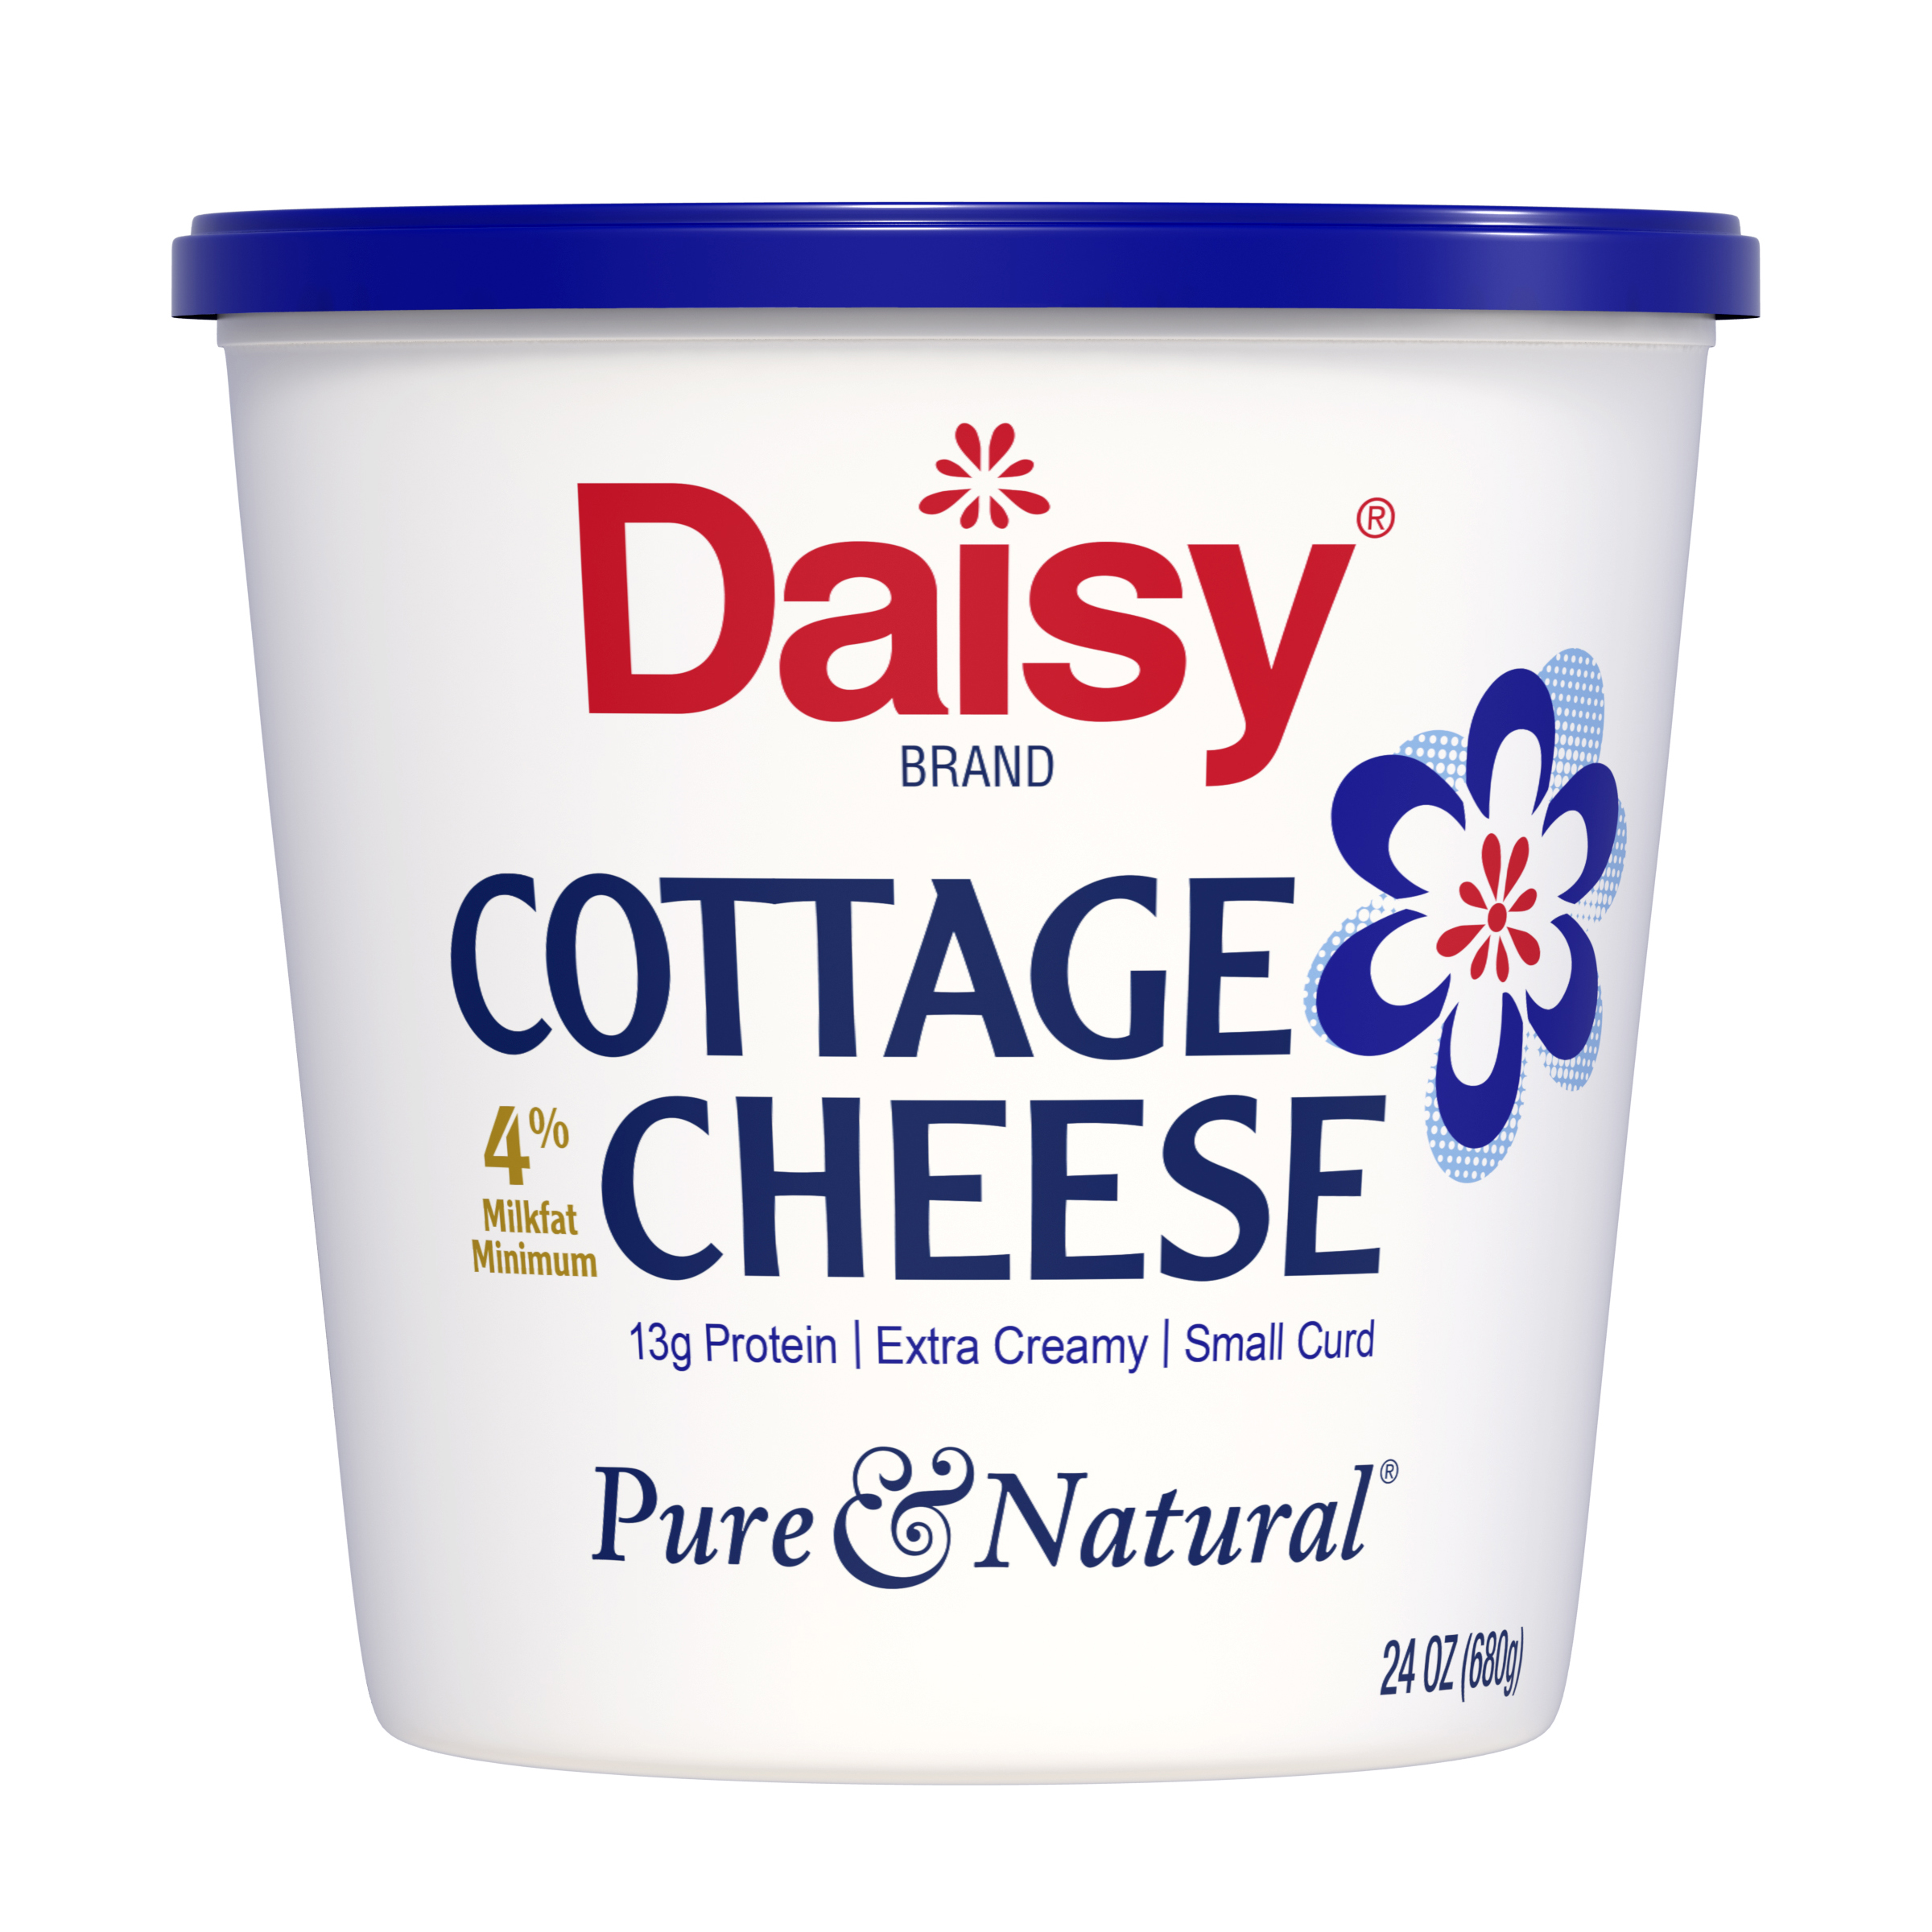 Daisy Pure and Natural Cottage Cheese, 4% Milkfat, 24 oz (1.5 lb) Tub (Refrigerated) - 13g of Protein per serving - image 1 of 10